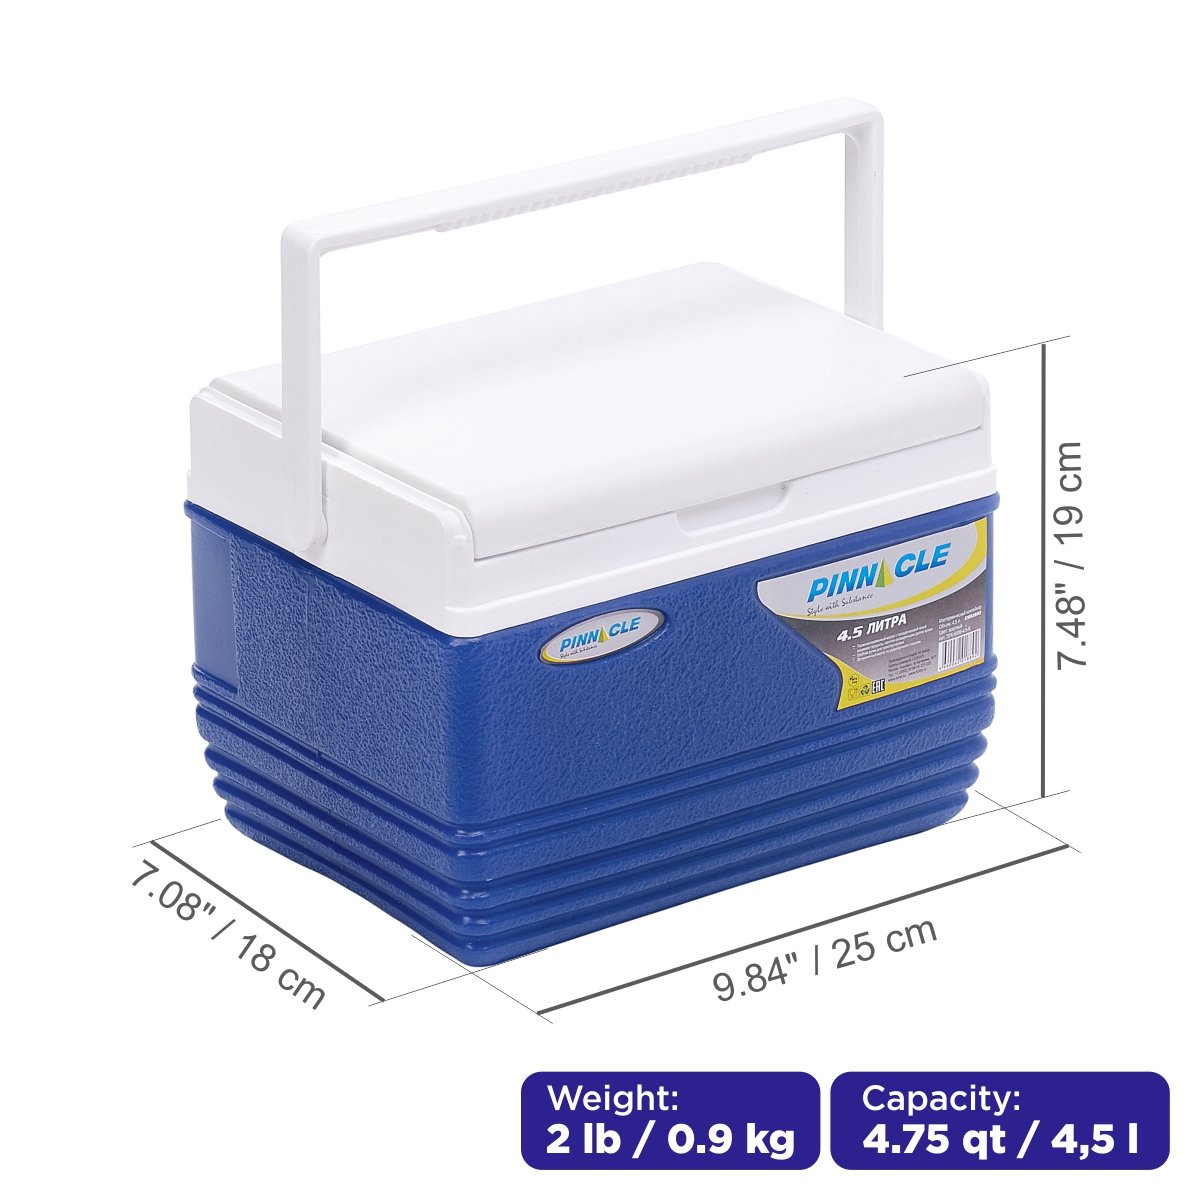 Eskimo Portable Hard-Sided Ice Chest for Camping, 4 qt, Navy Blue is 10 inches long, 7 inches wide and 7.5 inches high, weighing 2 lbs